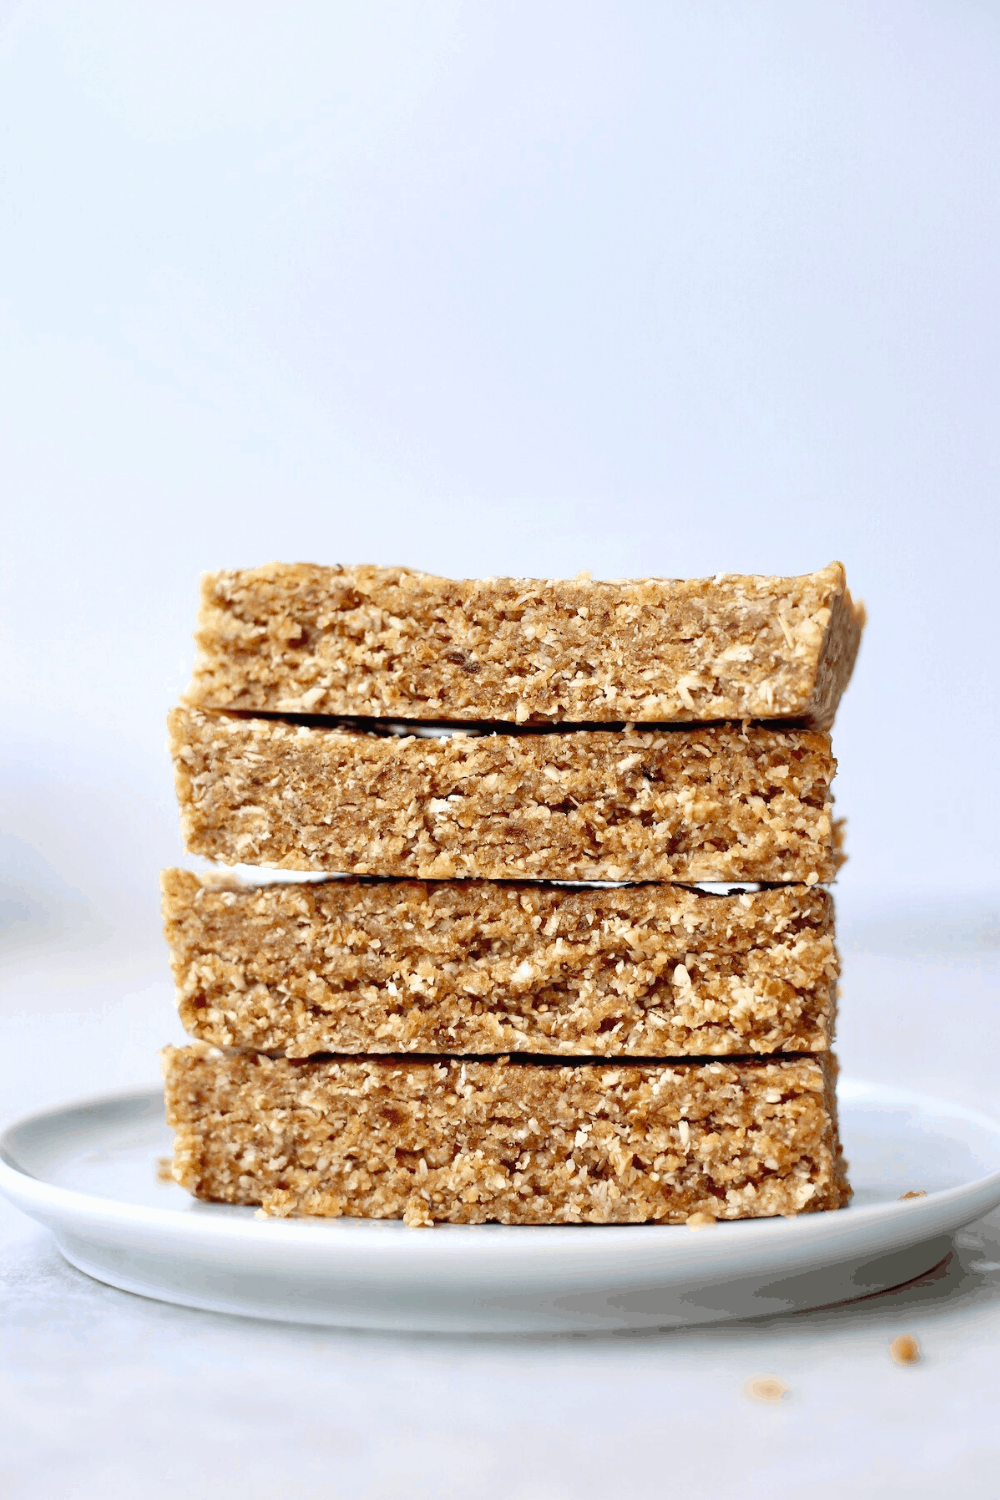 A side view of four golden brown rectangular homemade granola bars stacked on a light blue plate.